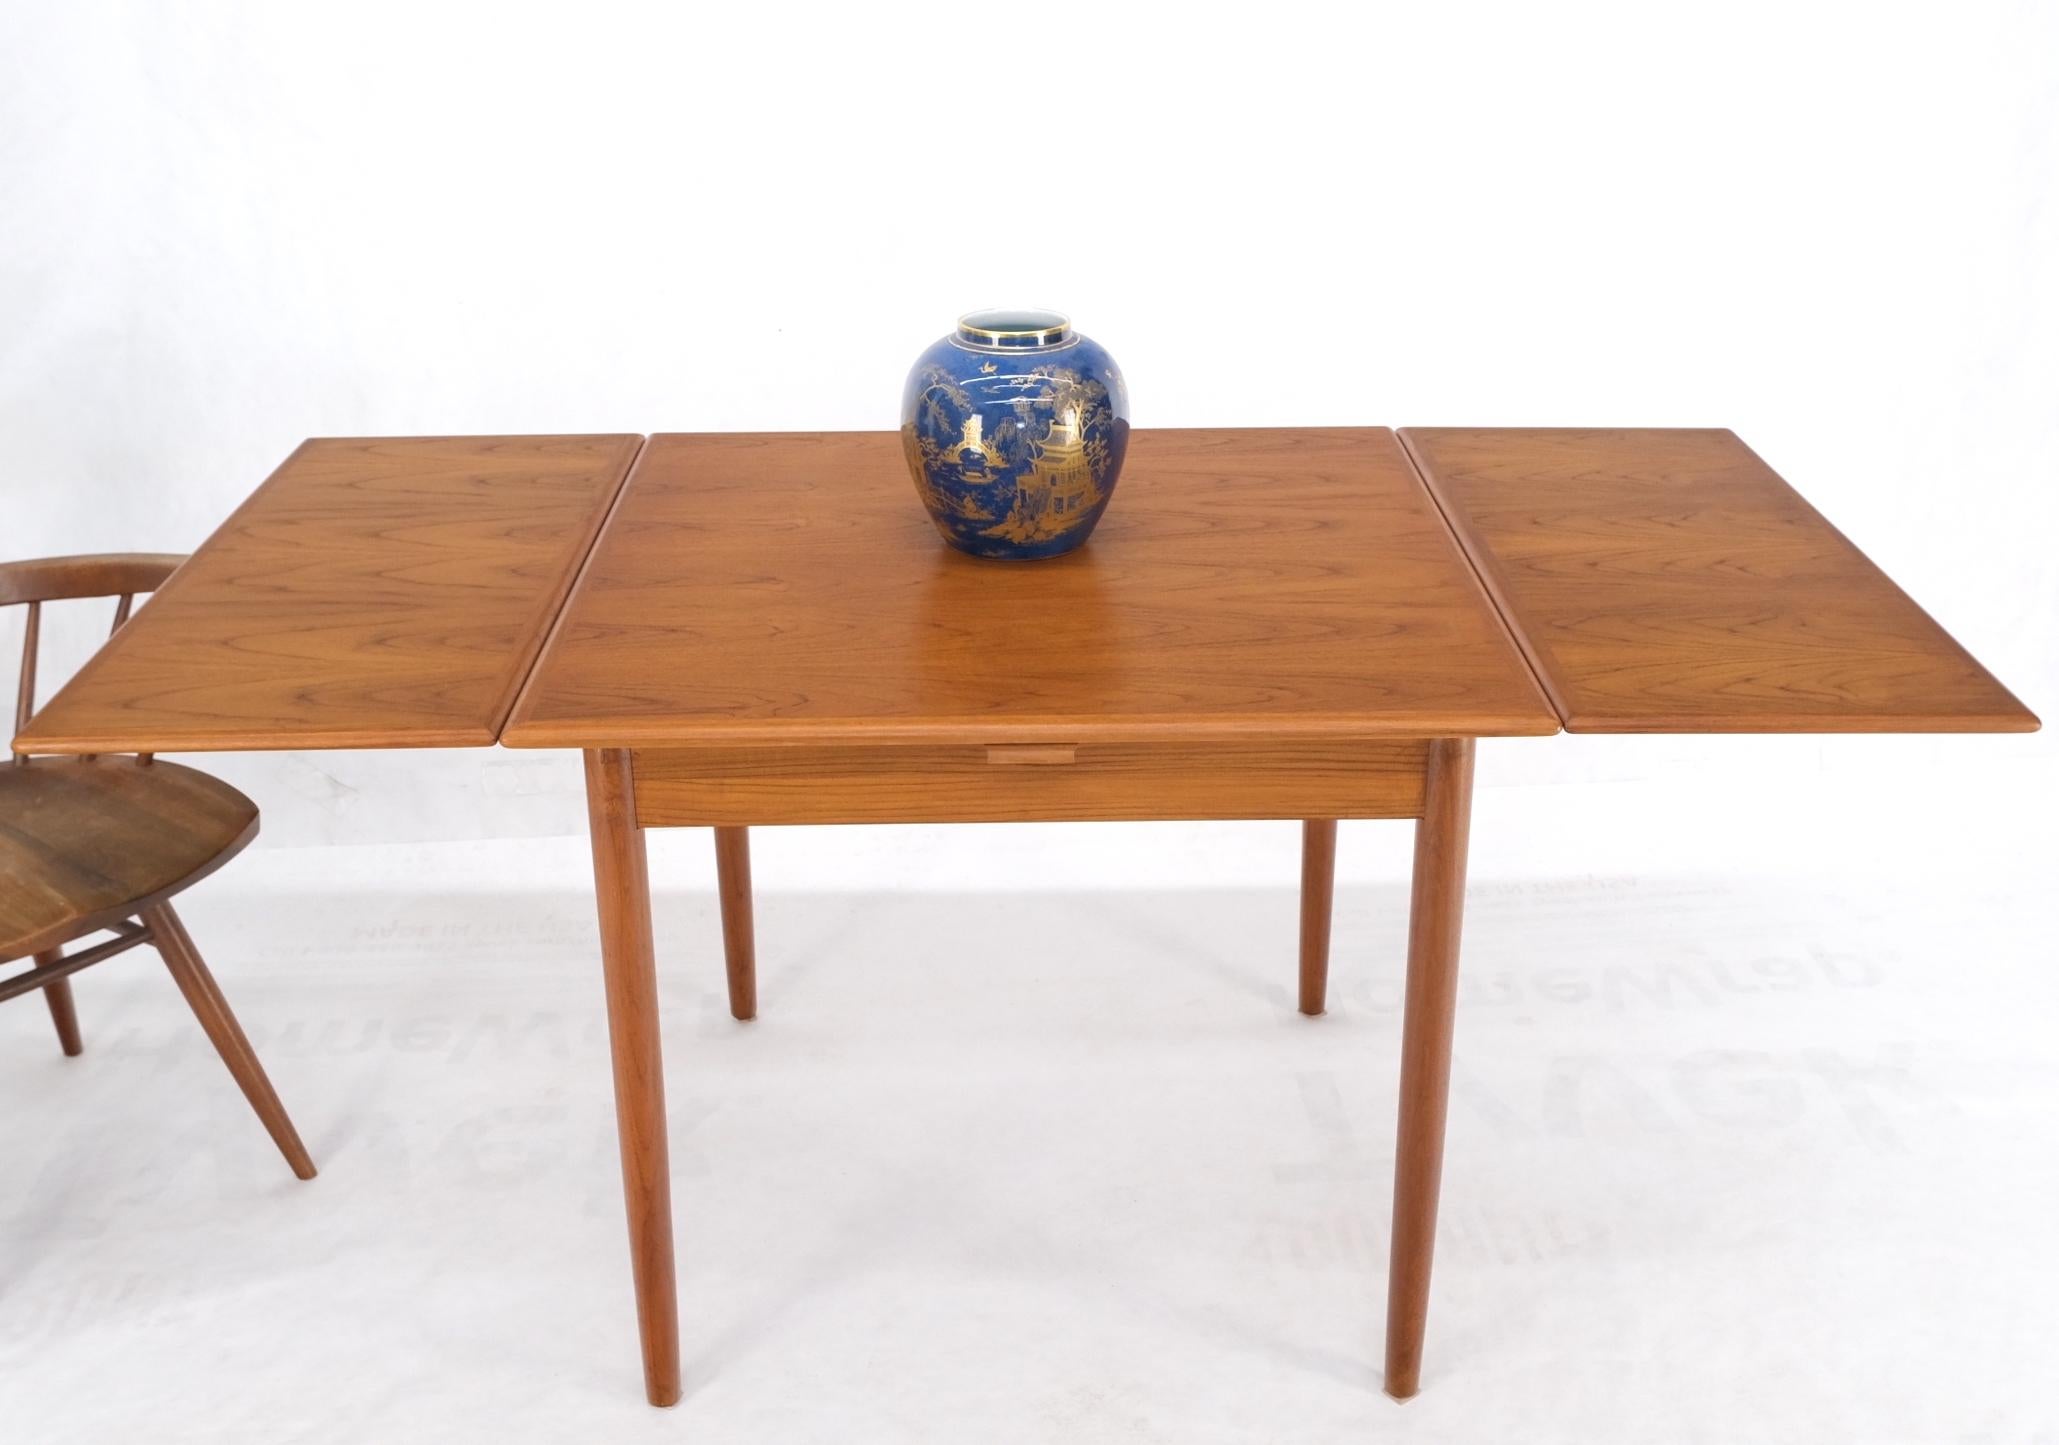 Danish Mid-Century Modern Square Teak Refectory Extension Boards Dining Table For Sale 1